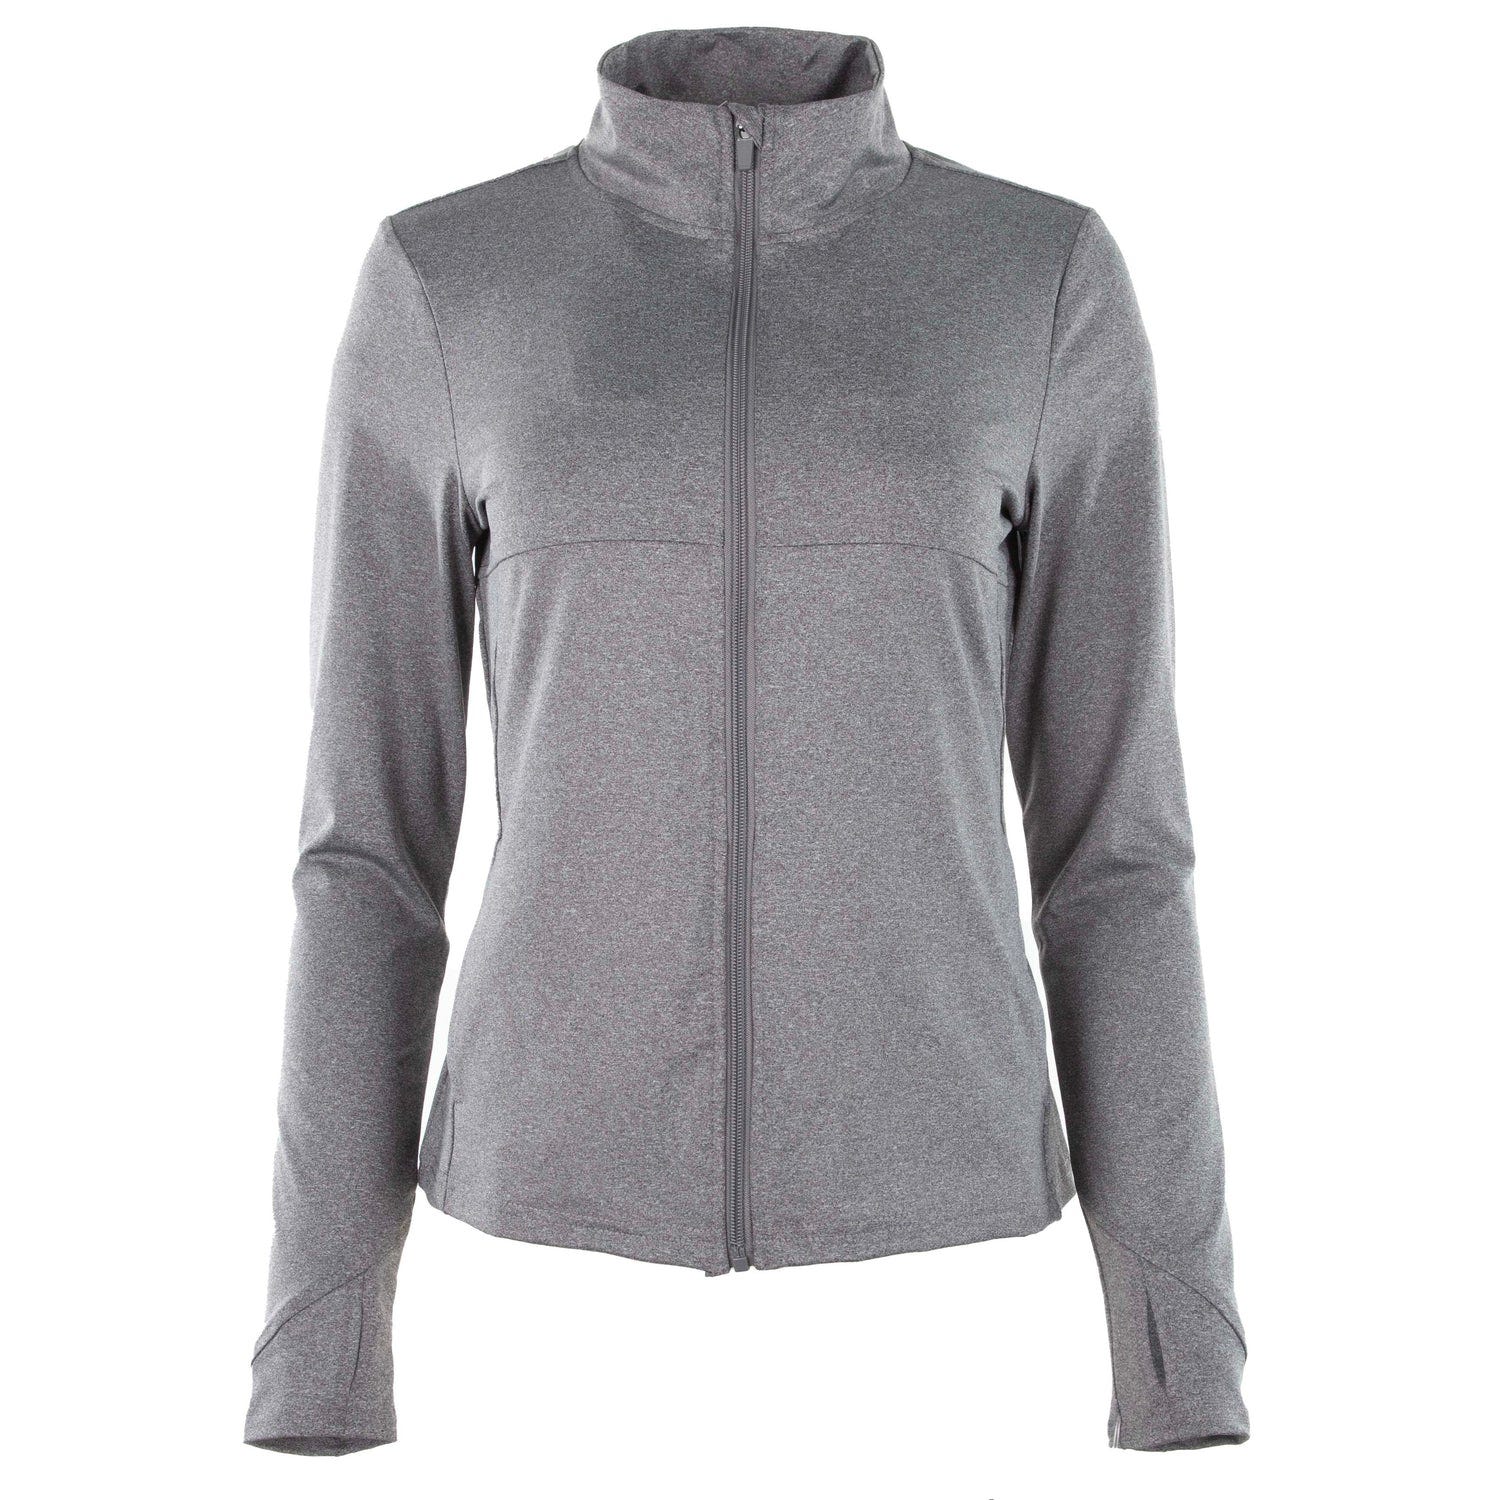 A gray full-zip jacket with a high collar and visible seams, featuring two front pockets.